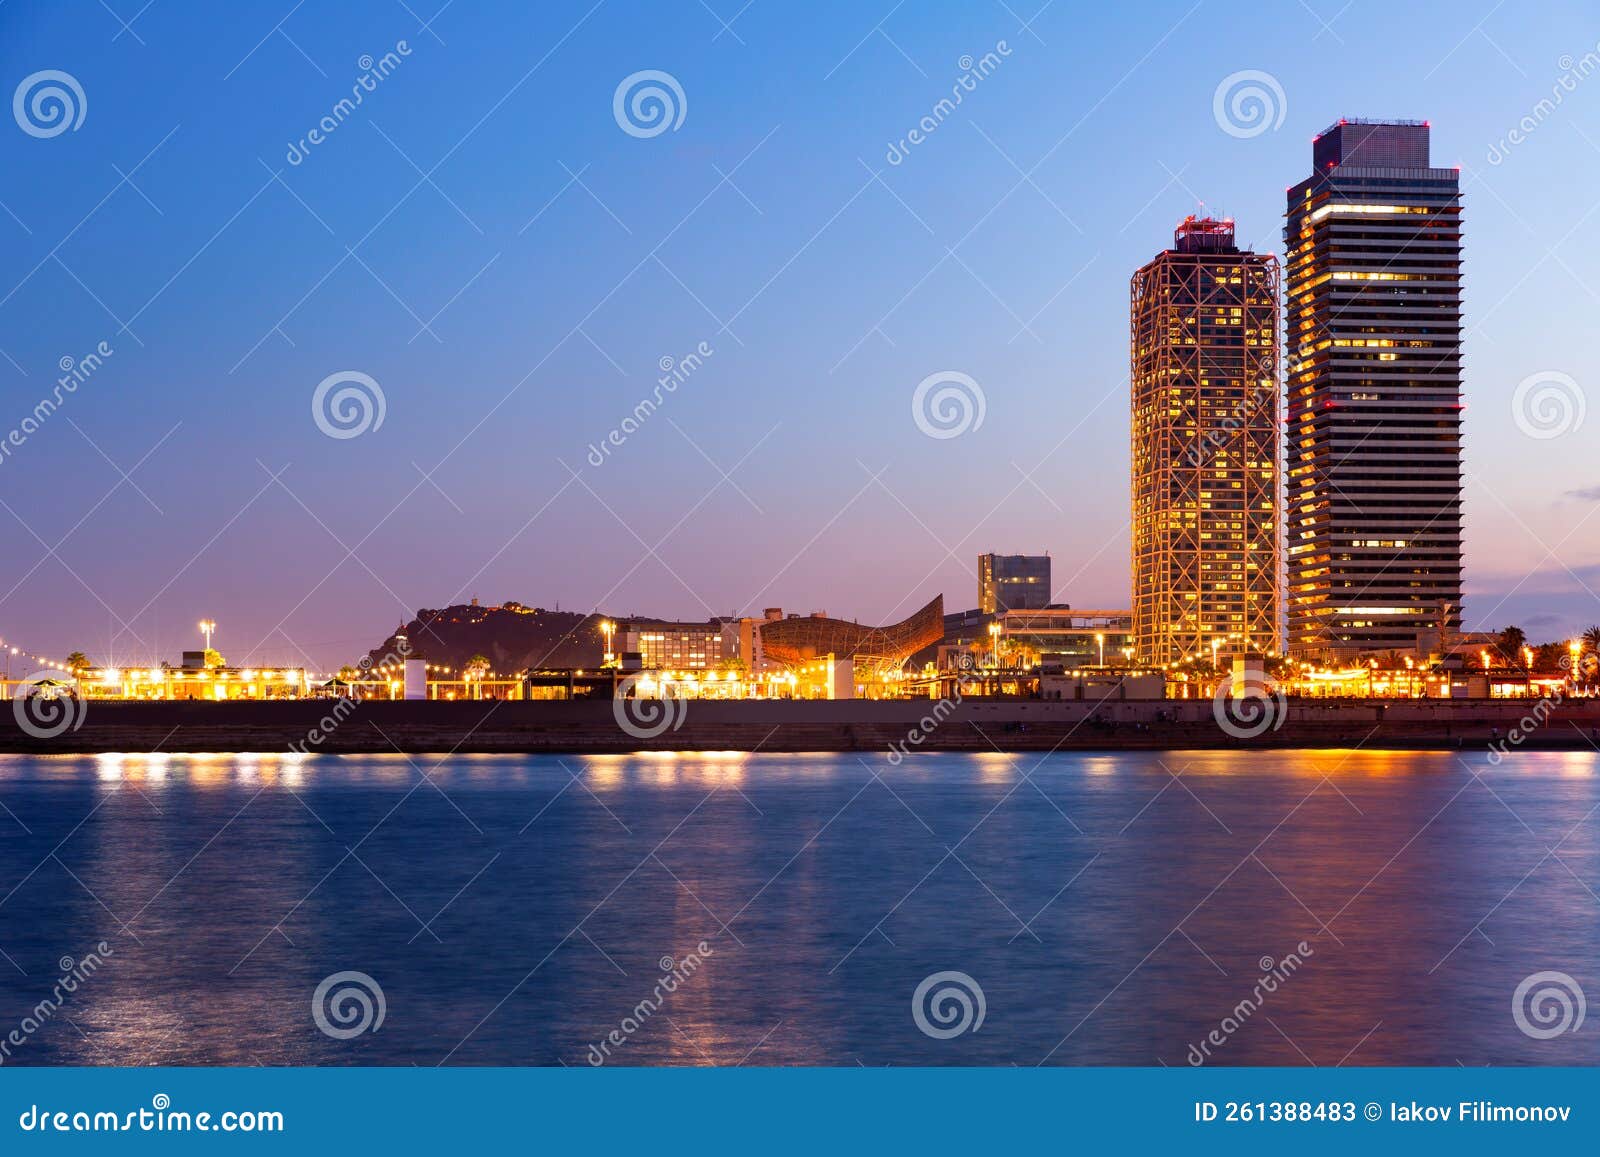 torre mapfre and hotel arts in evening time